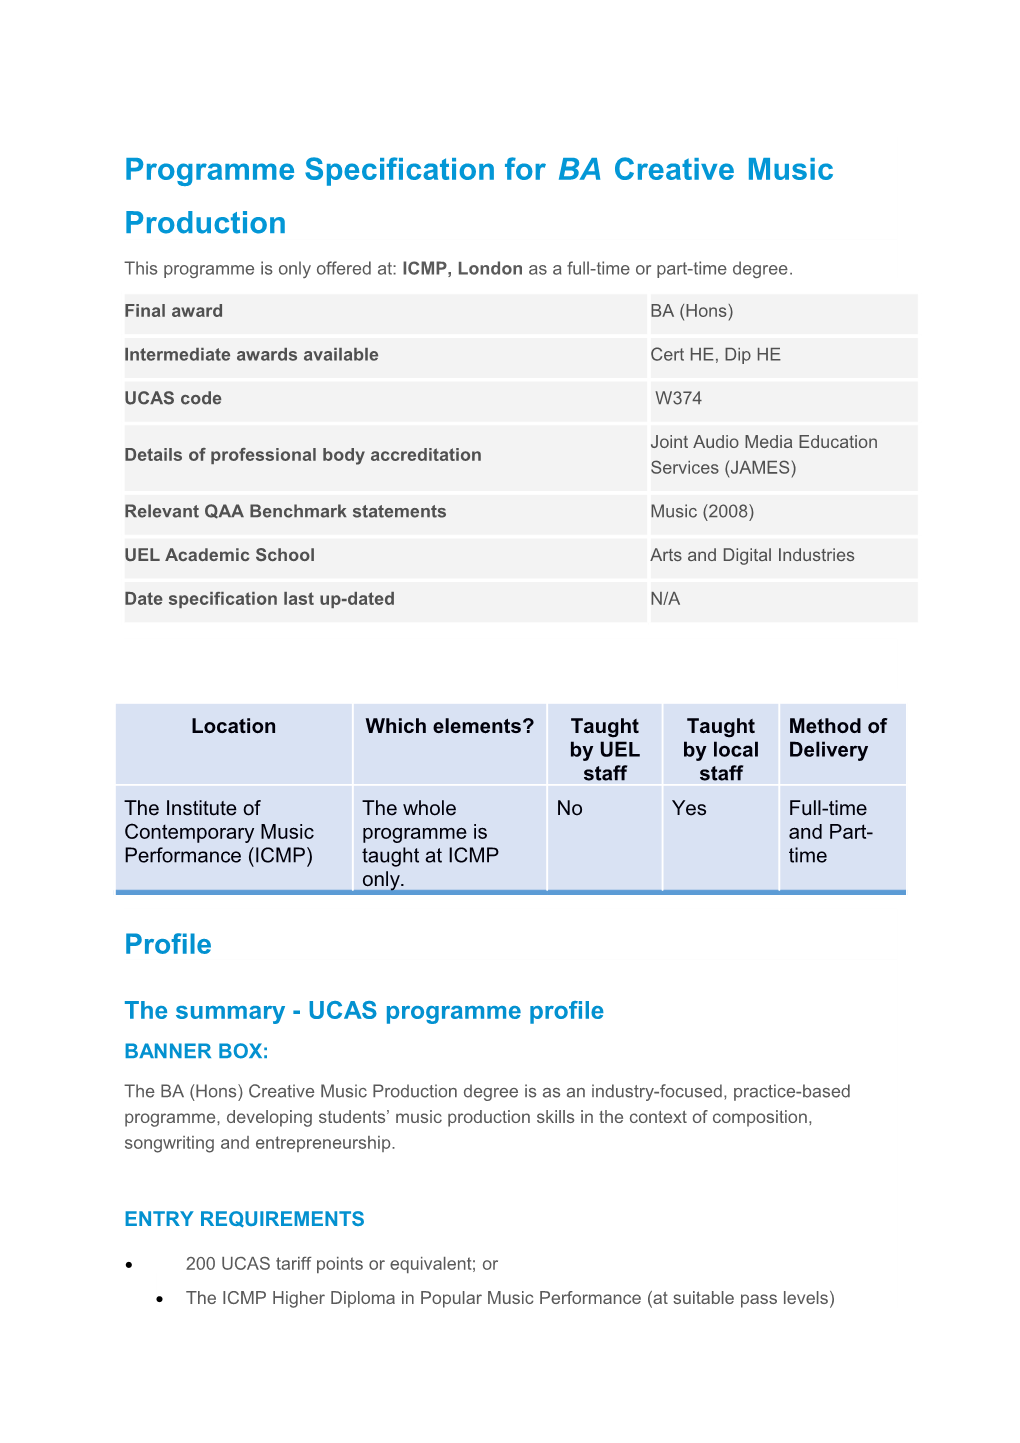 Programme Specification Forbacreativemusic Production